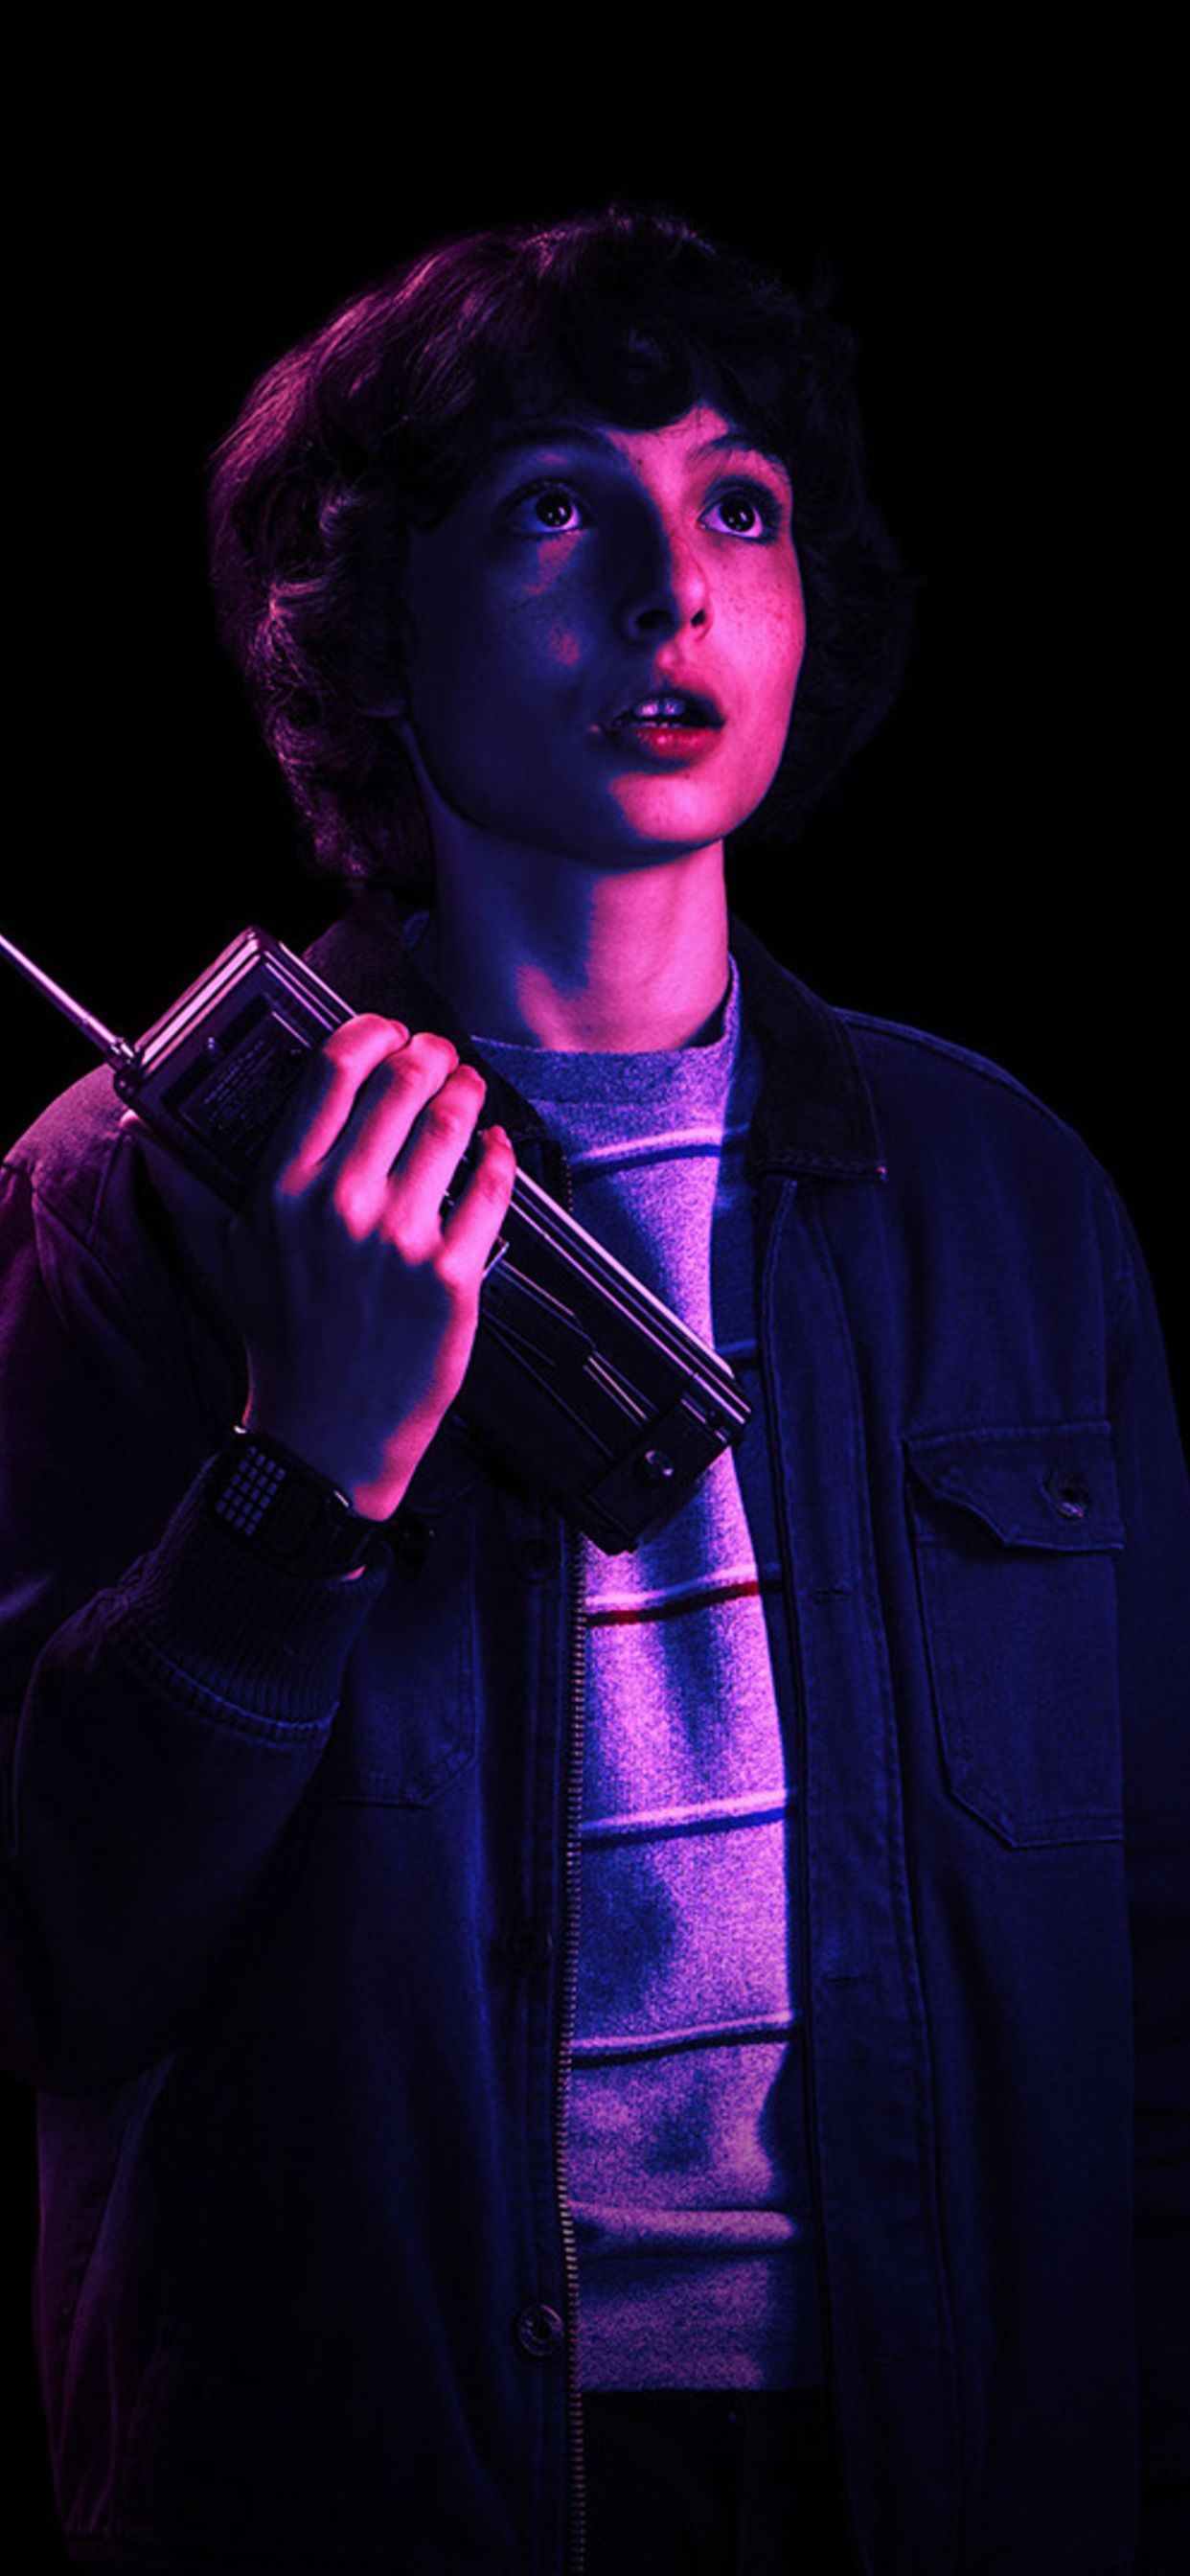 Stranger Things Iphone 11 Wallpapers